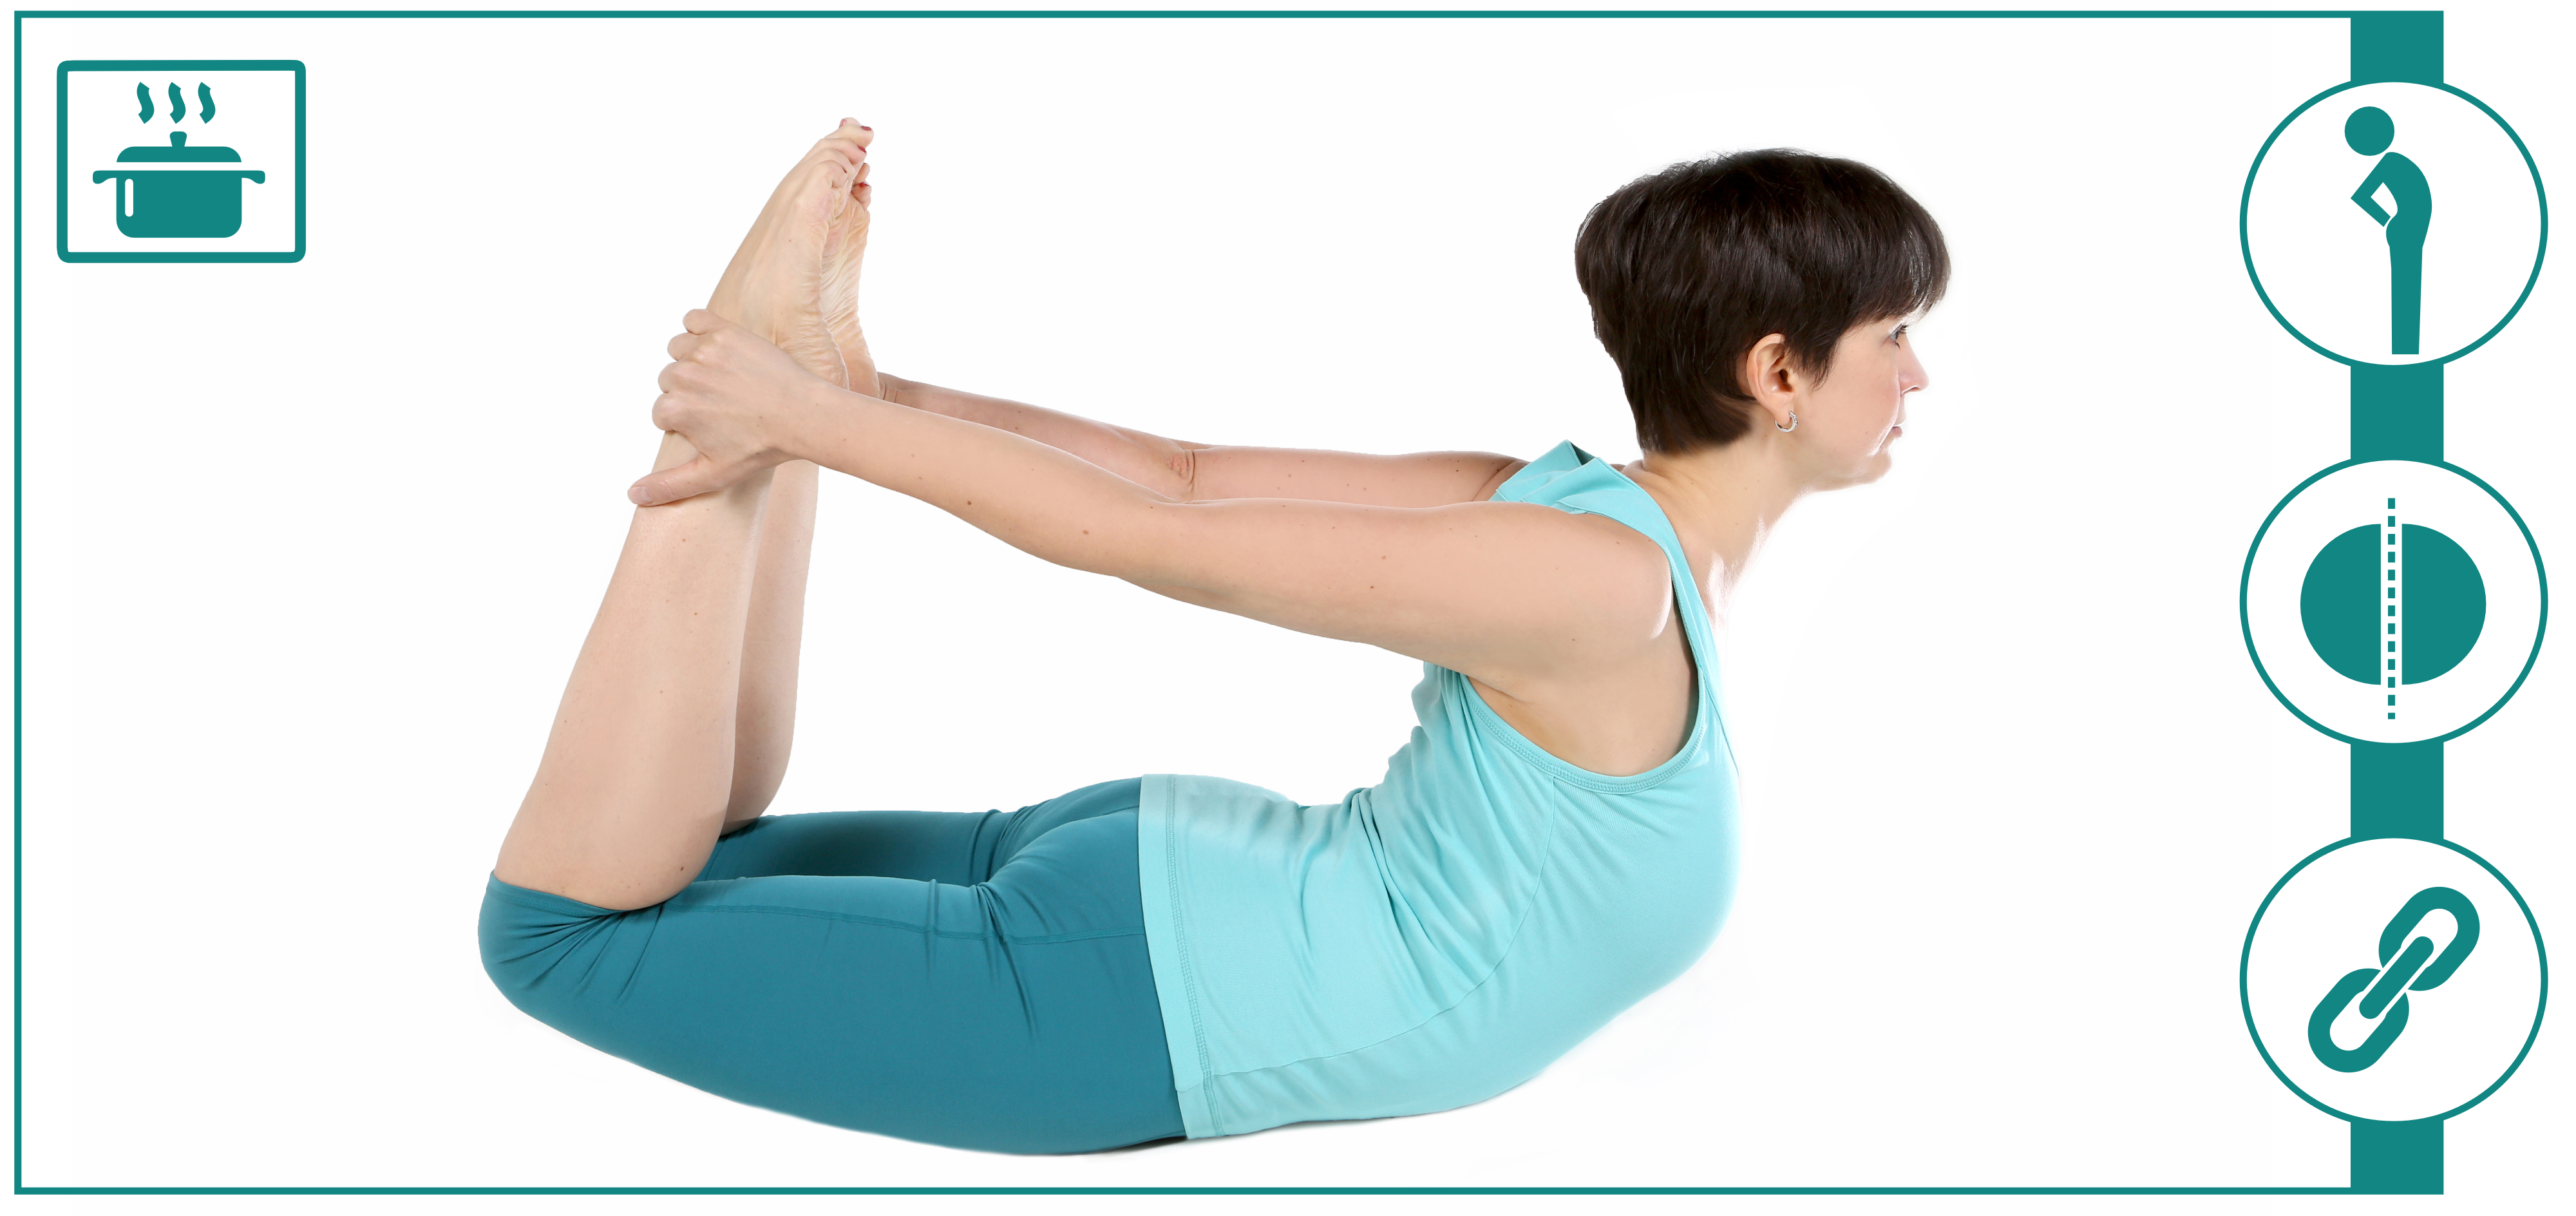 How can you safely work on backbends? – The Shakti Yoga Wheel®